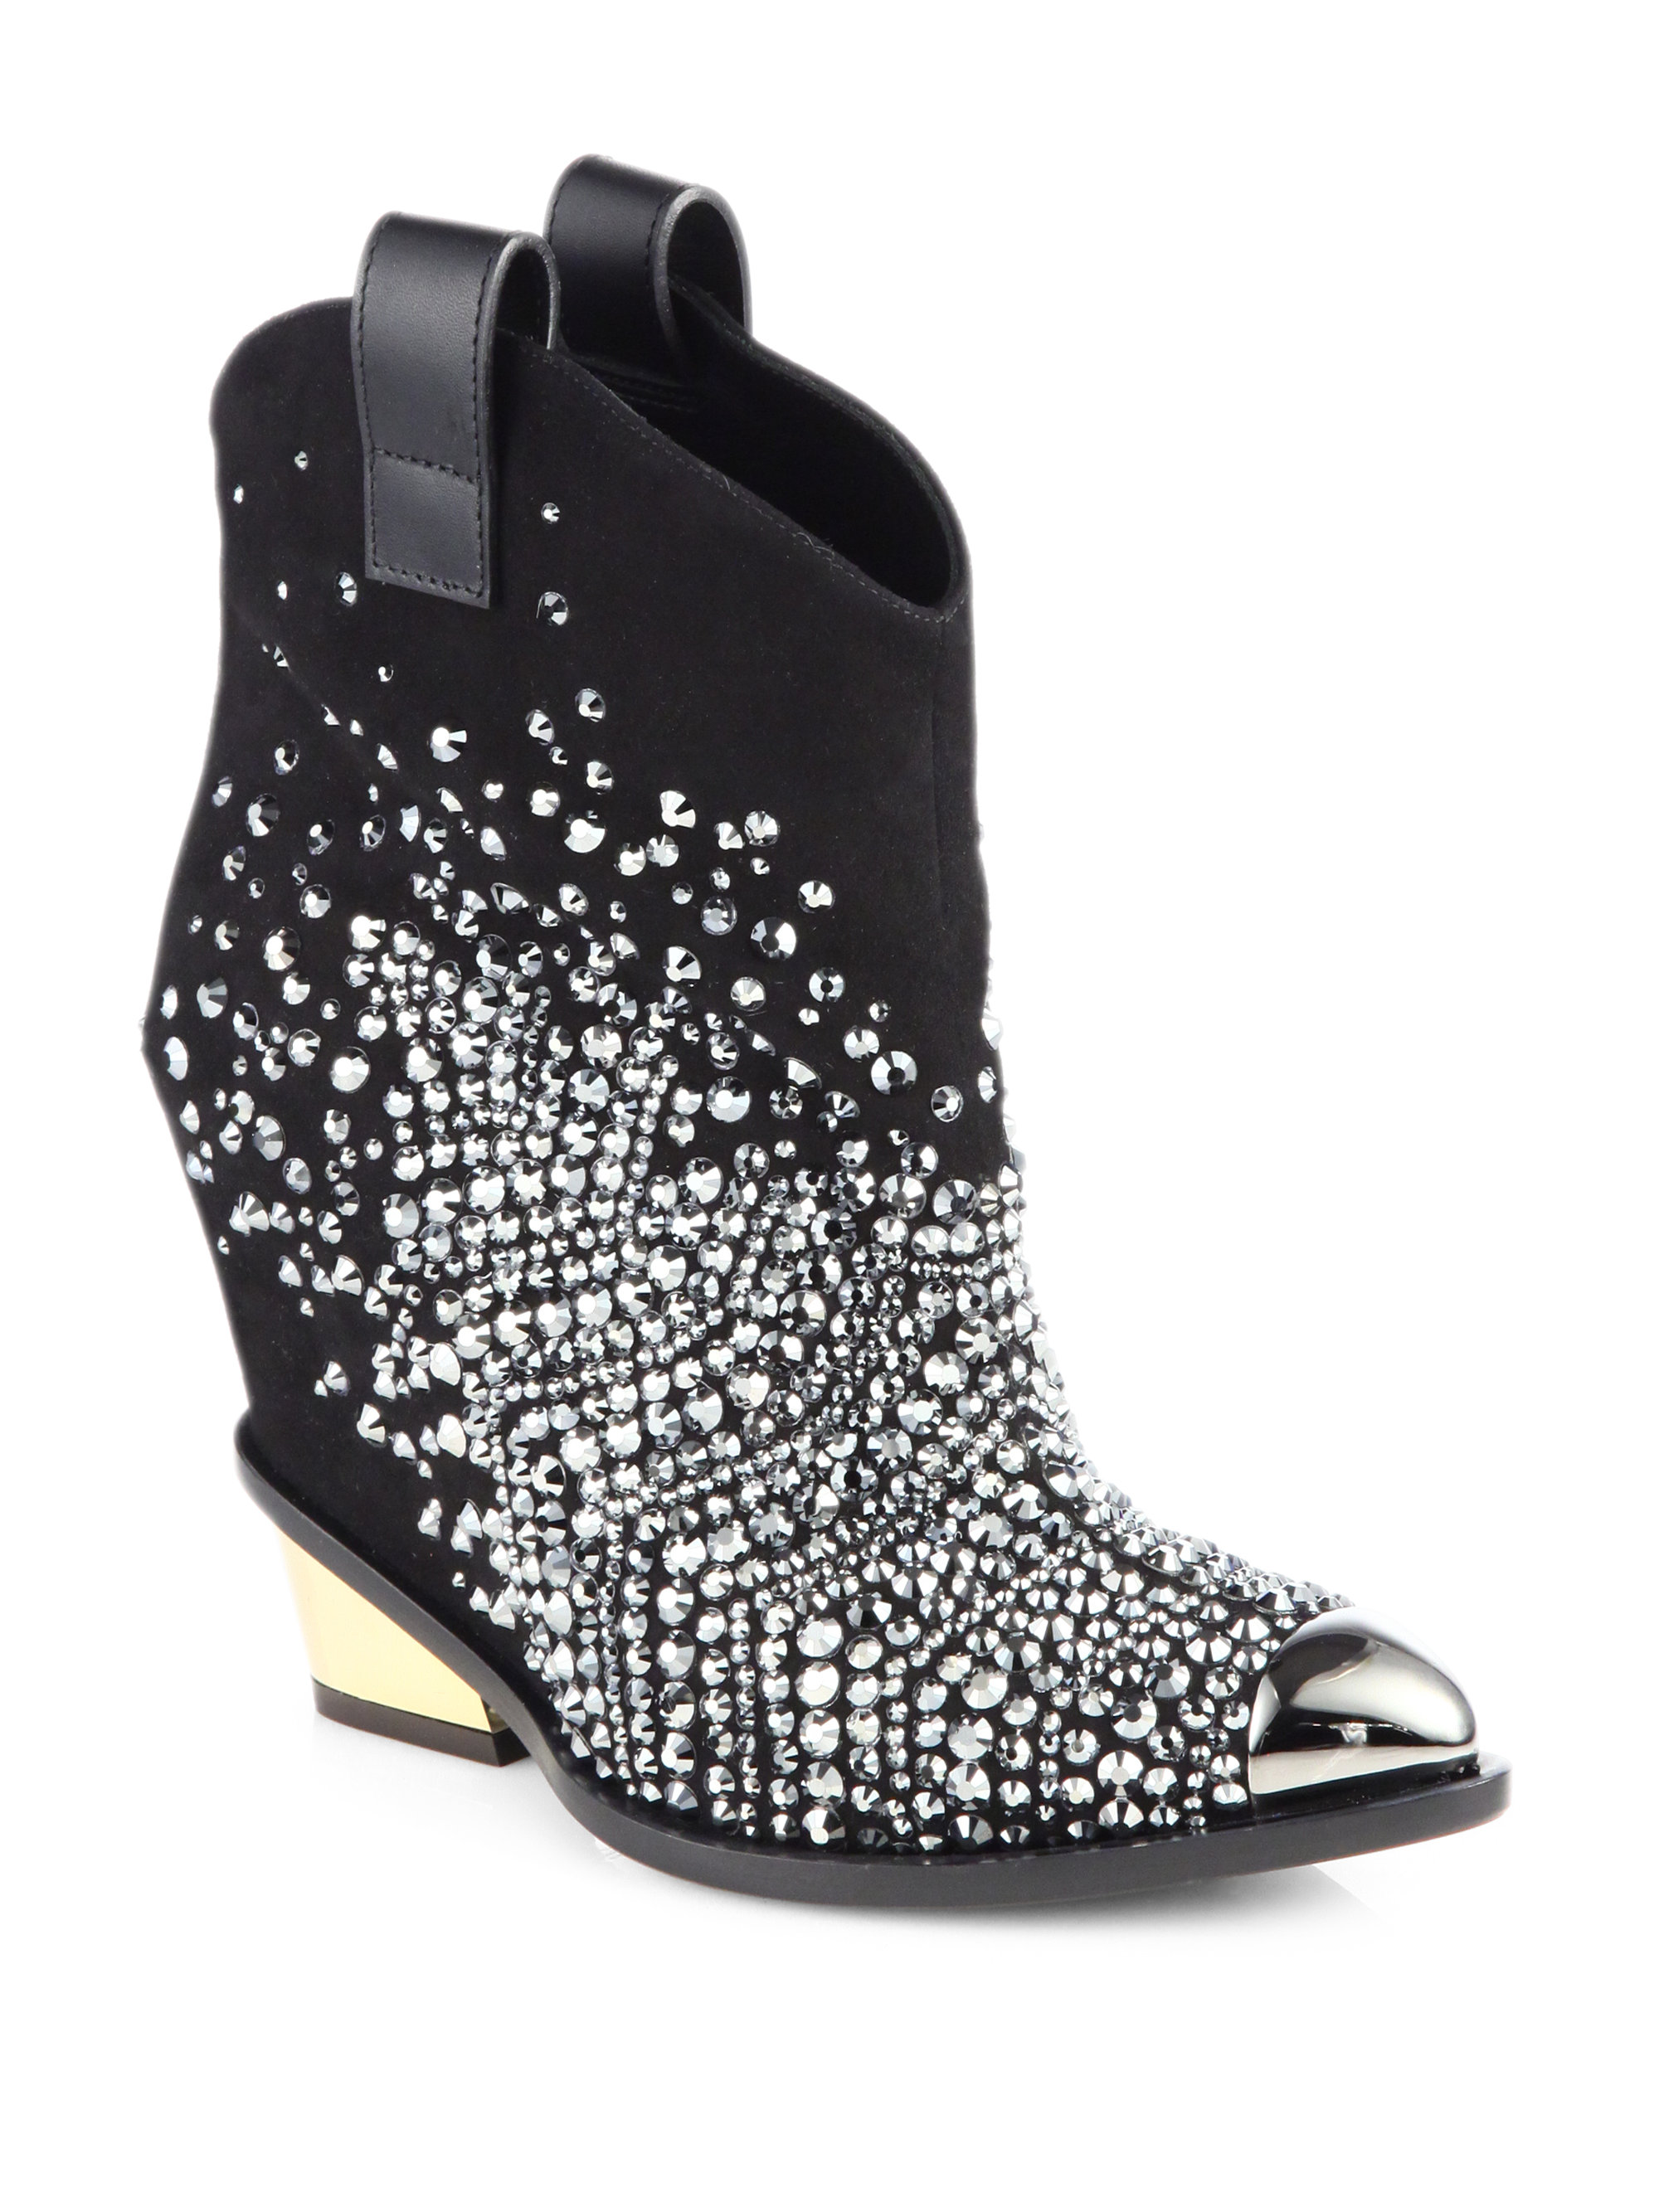 Lyst - Giuseppe Zanotti Crystal Metal Suede Wedge Ankle Boots in Black